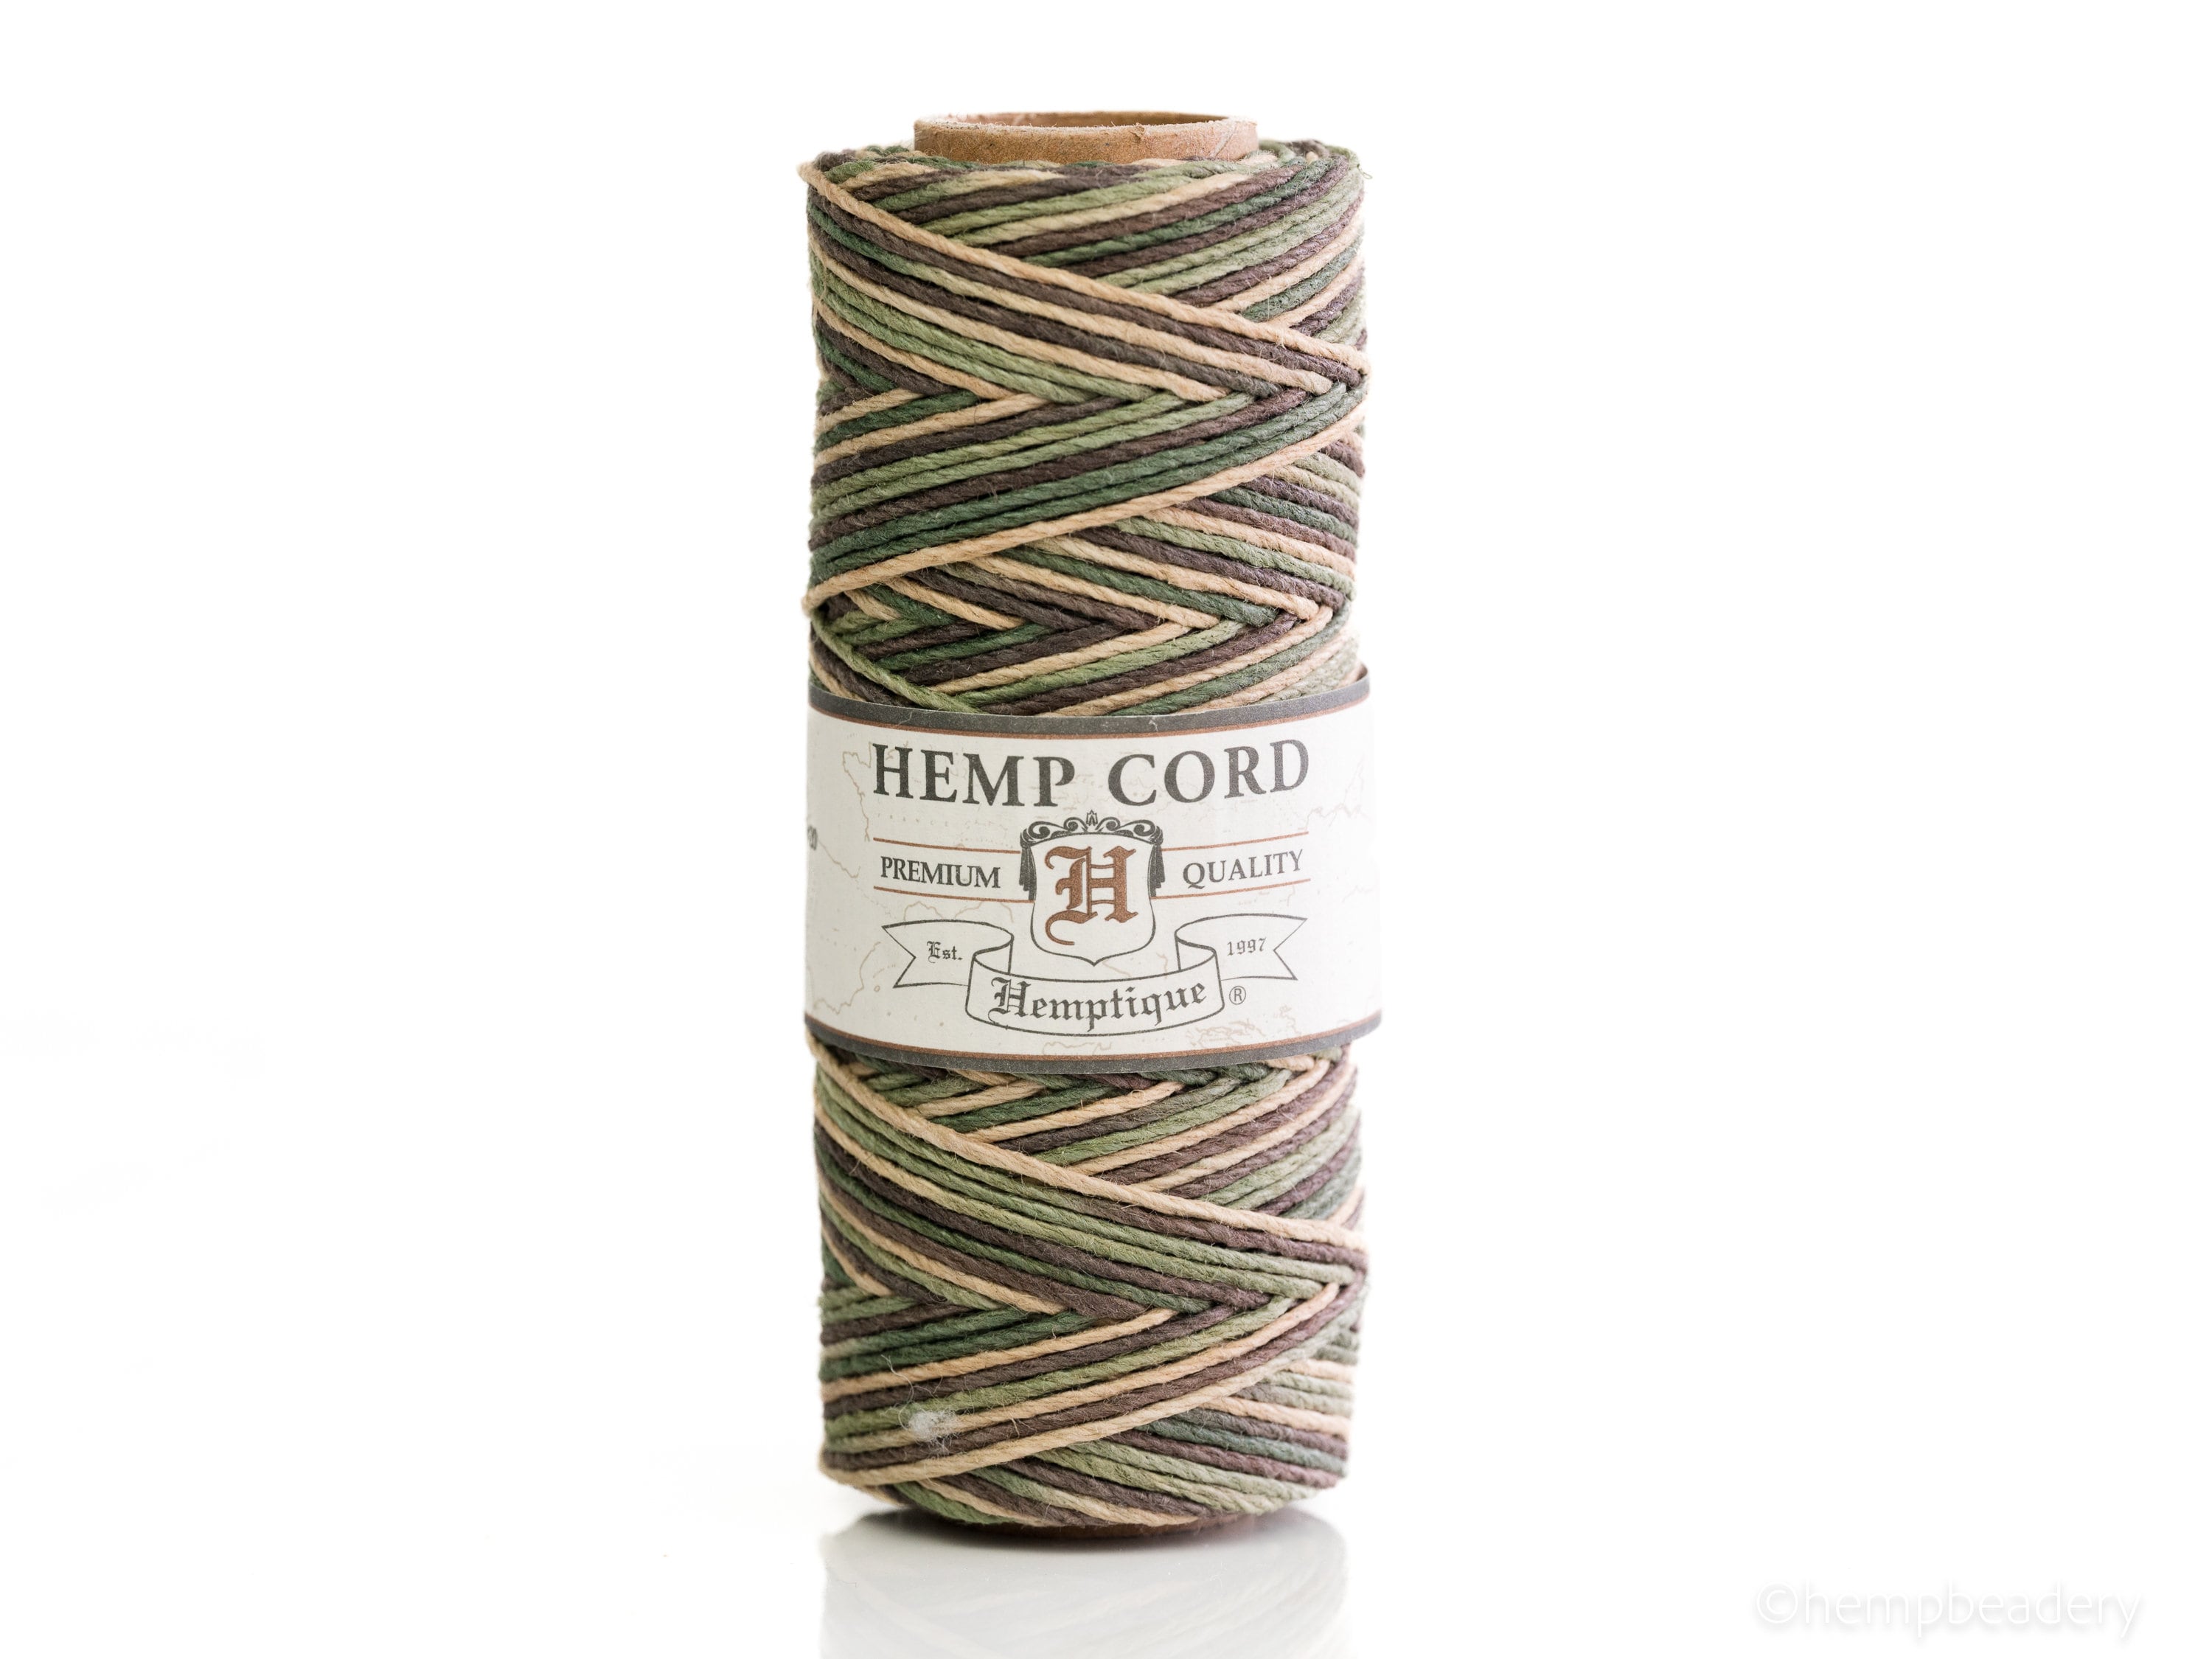 1MM Camouflage Hemp Cord, Eco Friendly Product Made by Hemptique, Macrame  Jewelry Supply, 205 Feet Spool -  Sweden